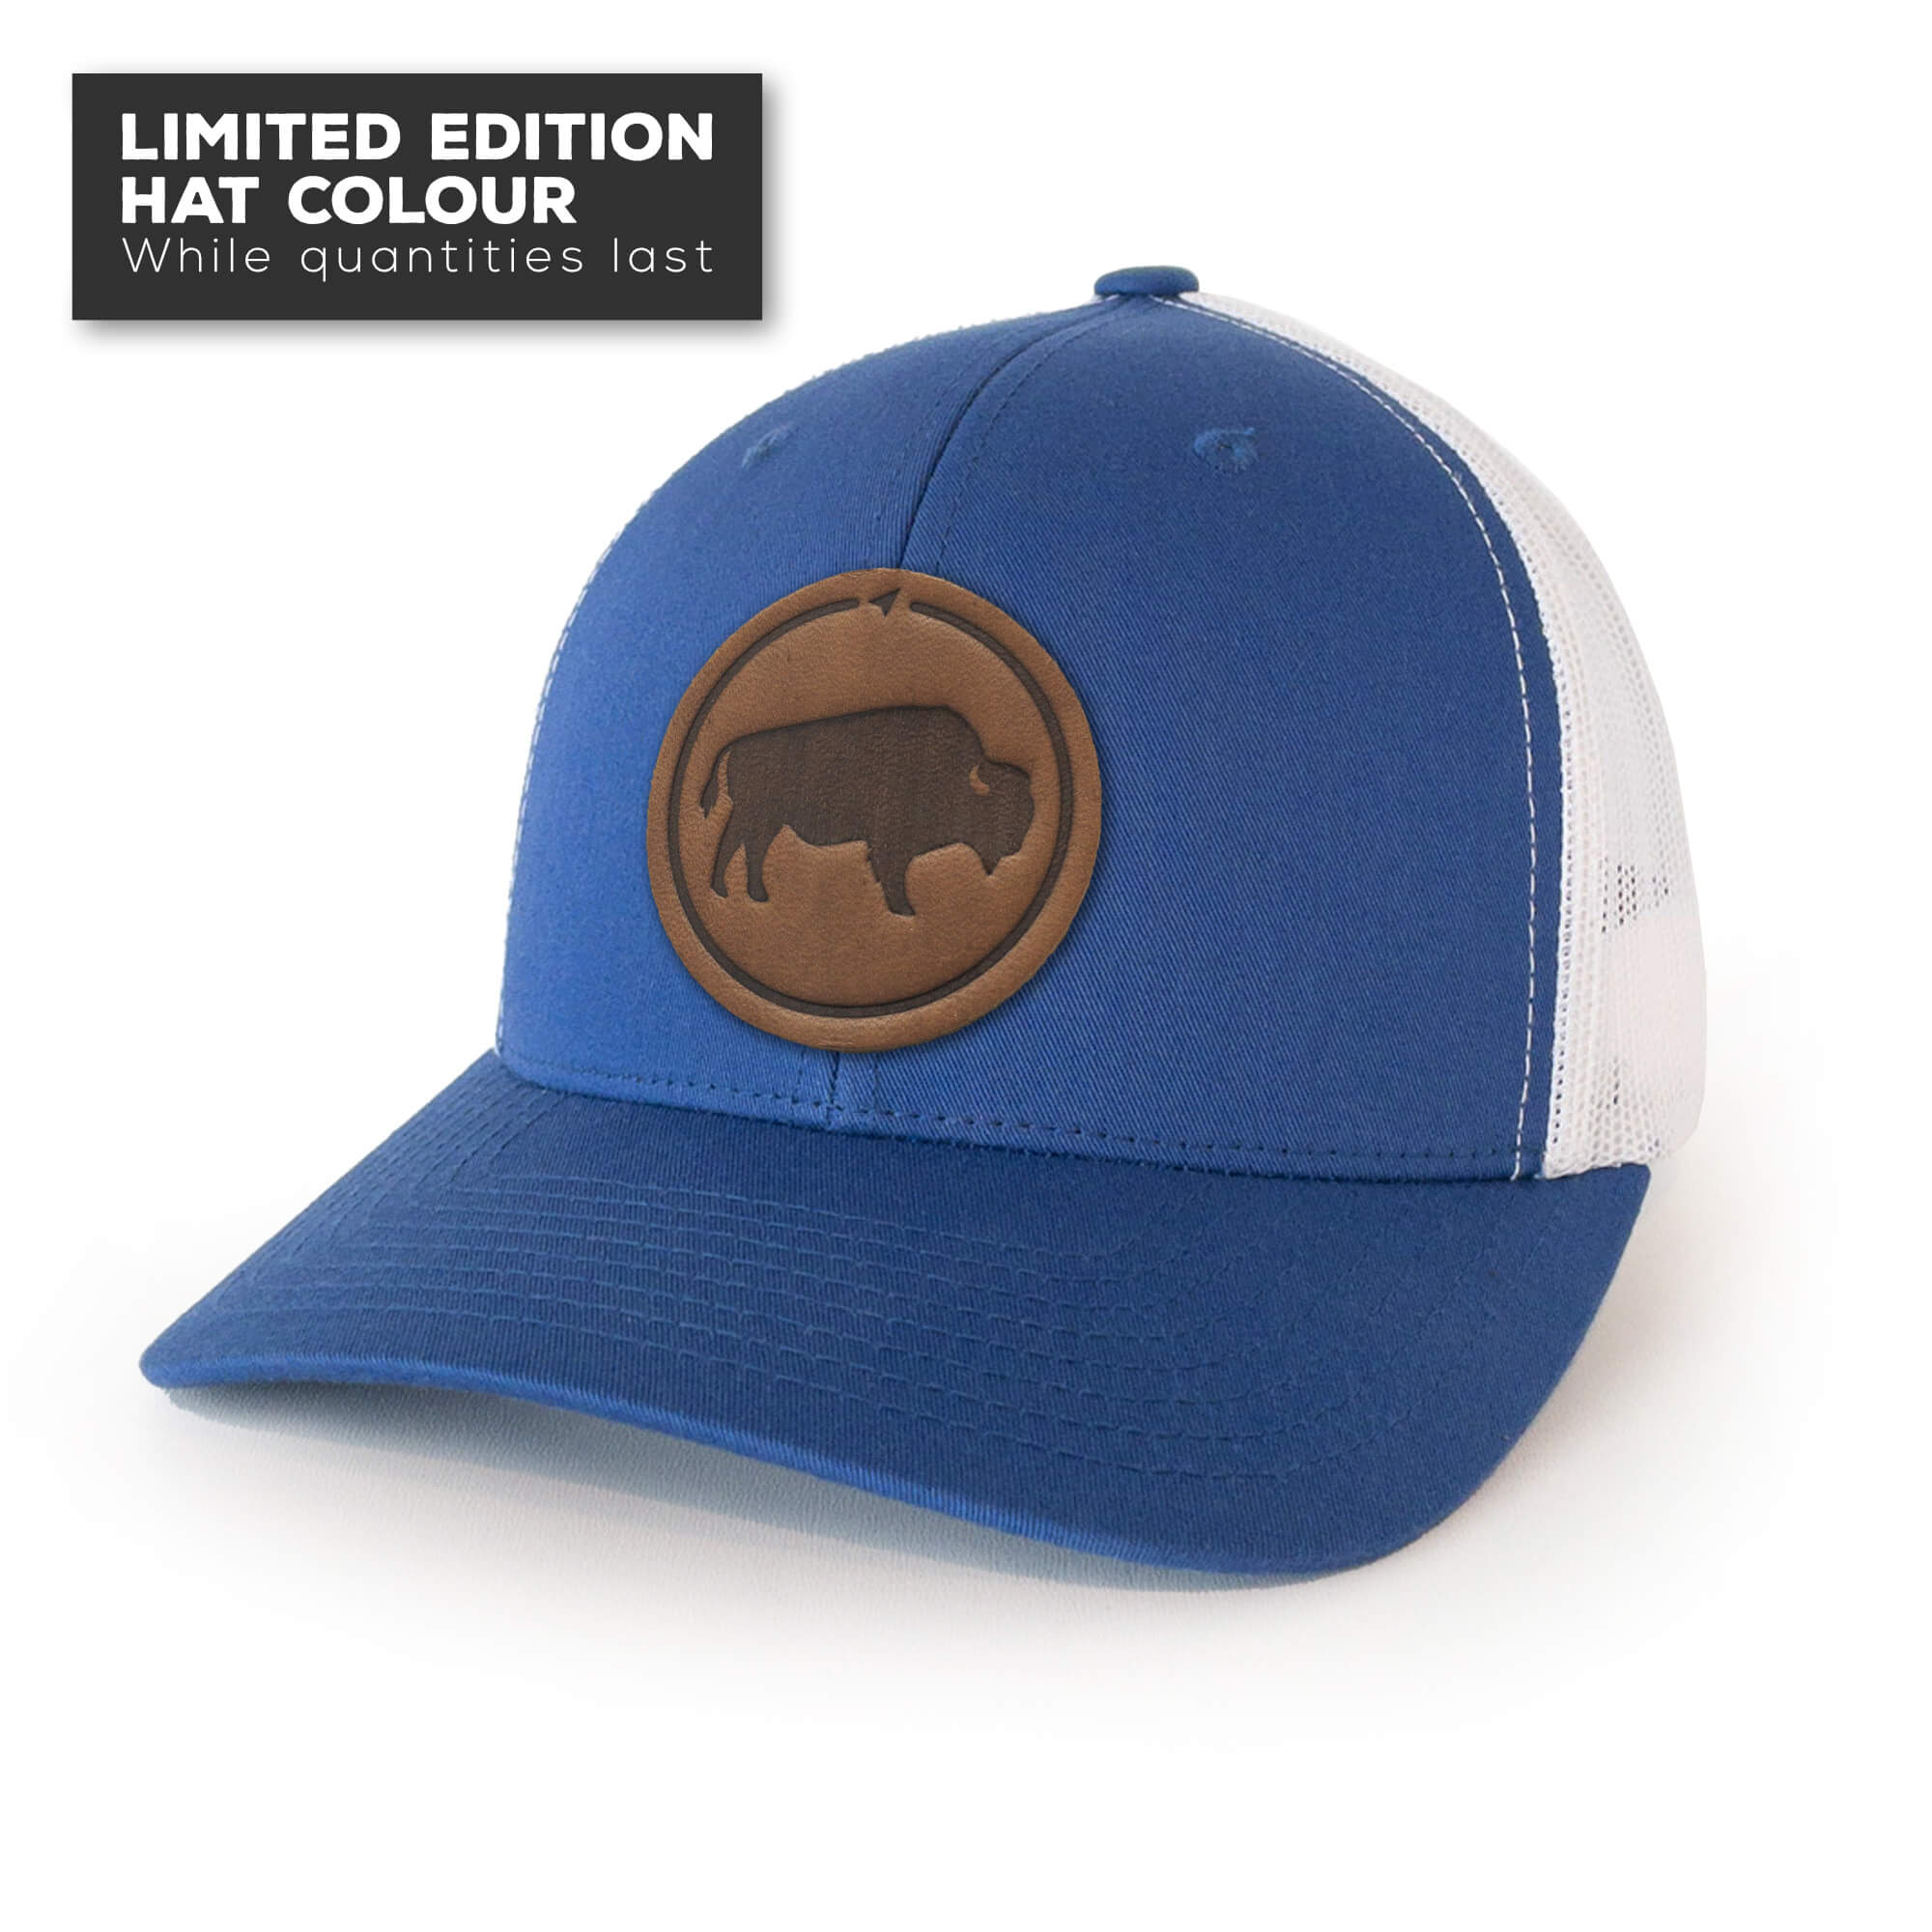 Royal Blue trucker hat with full-grain leather patch of Bison